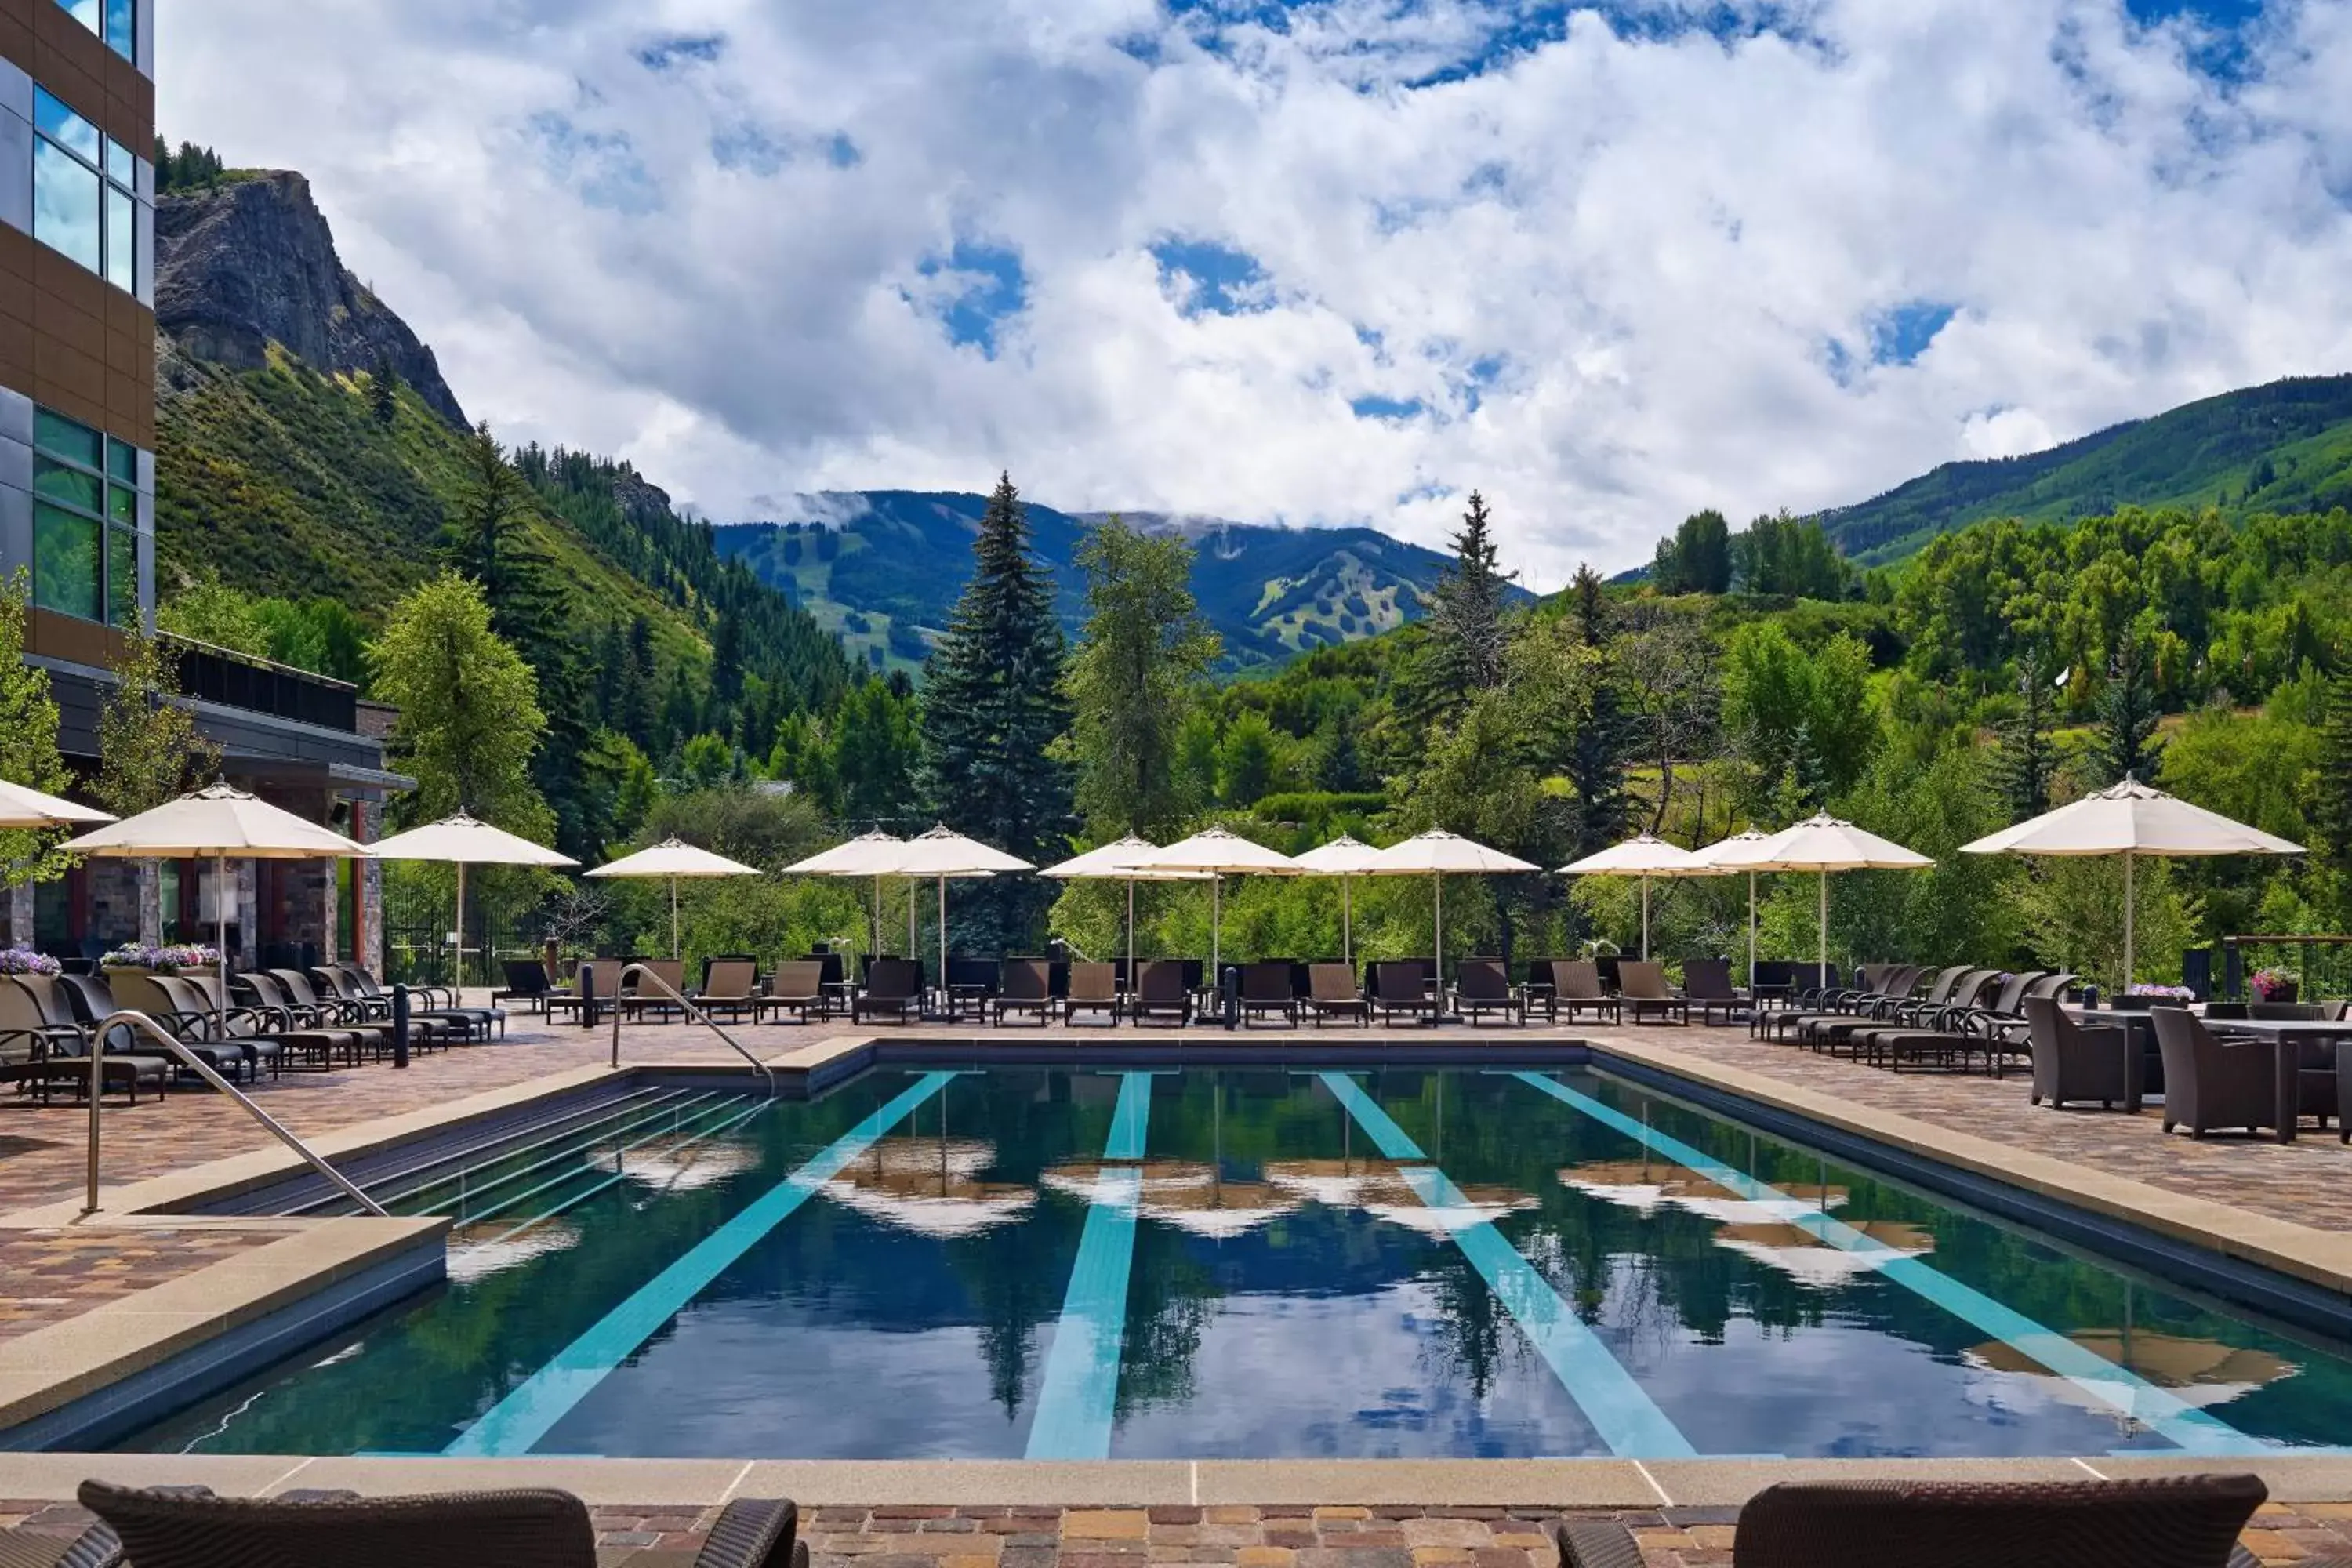 Swimming Pool in The Westin Riverfront Resort & Spa, Avon, Vail Valley